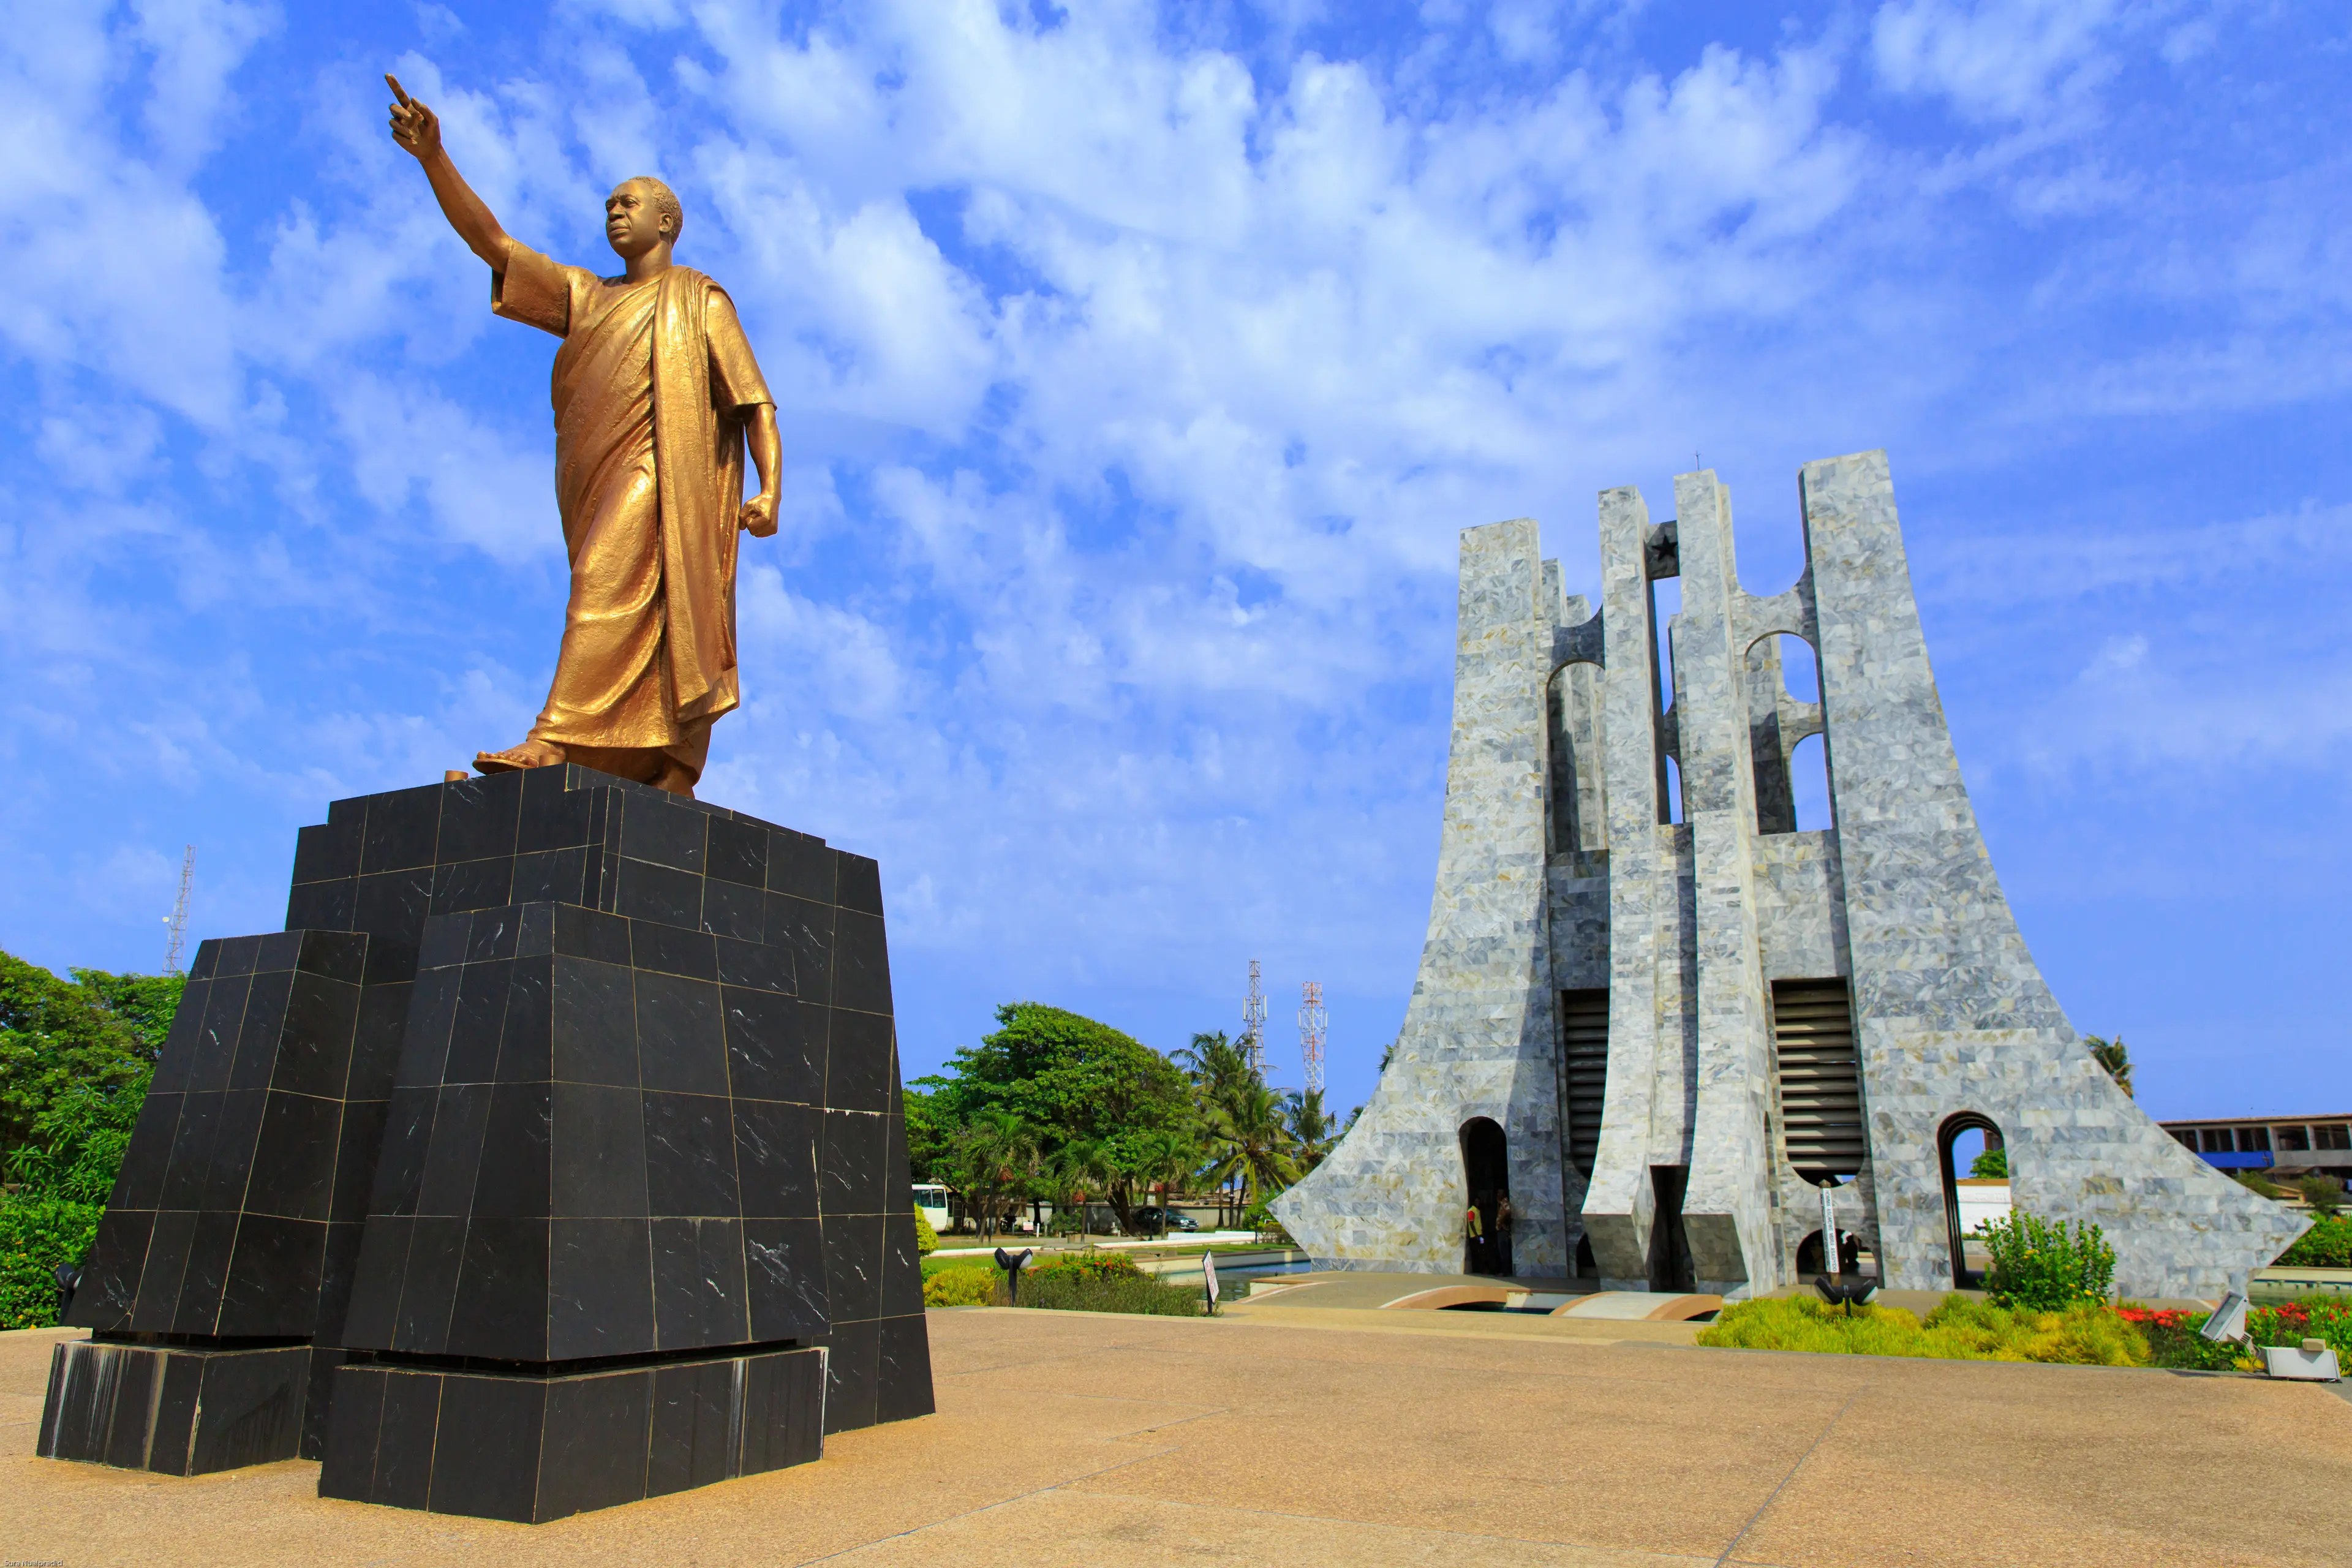 4-Day Food, Wine, Shopping & Sightseeing Tour in Accra, Ghana